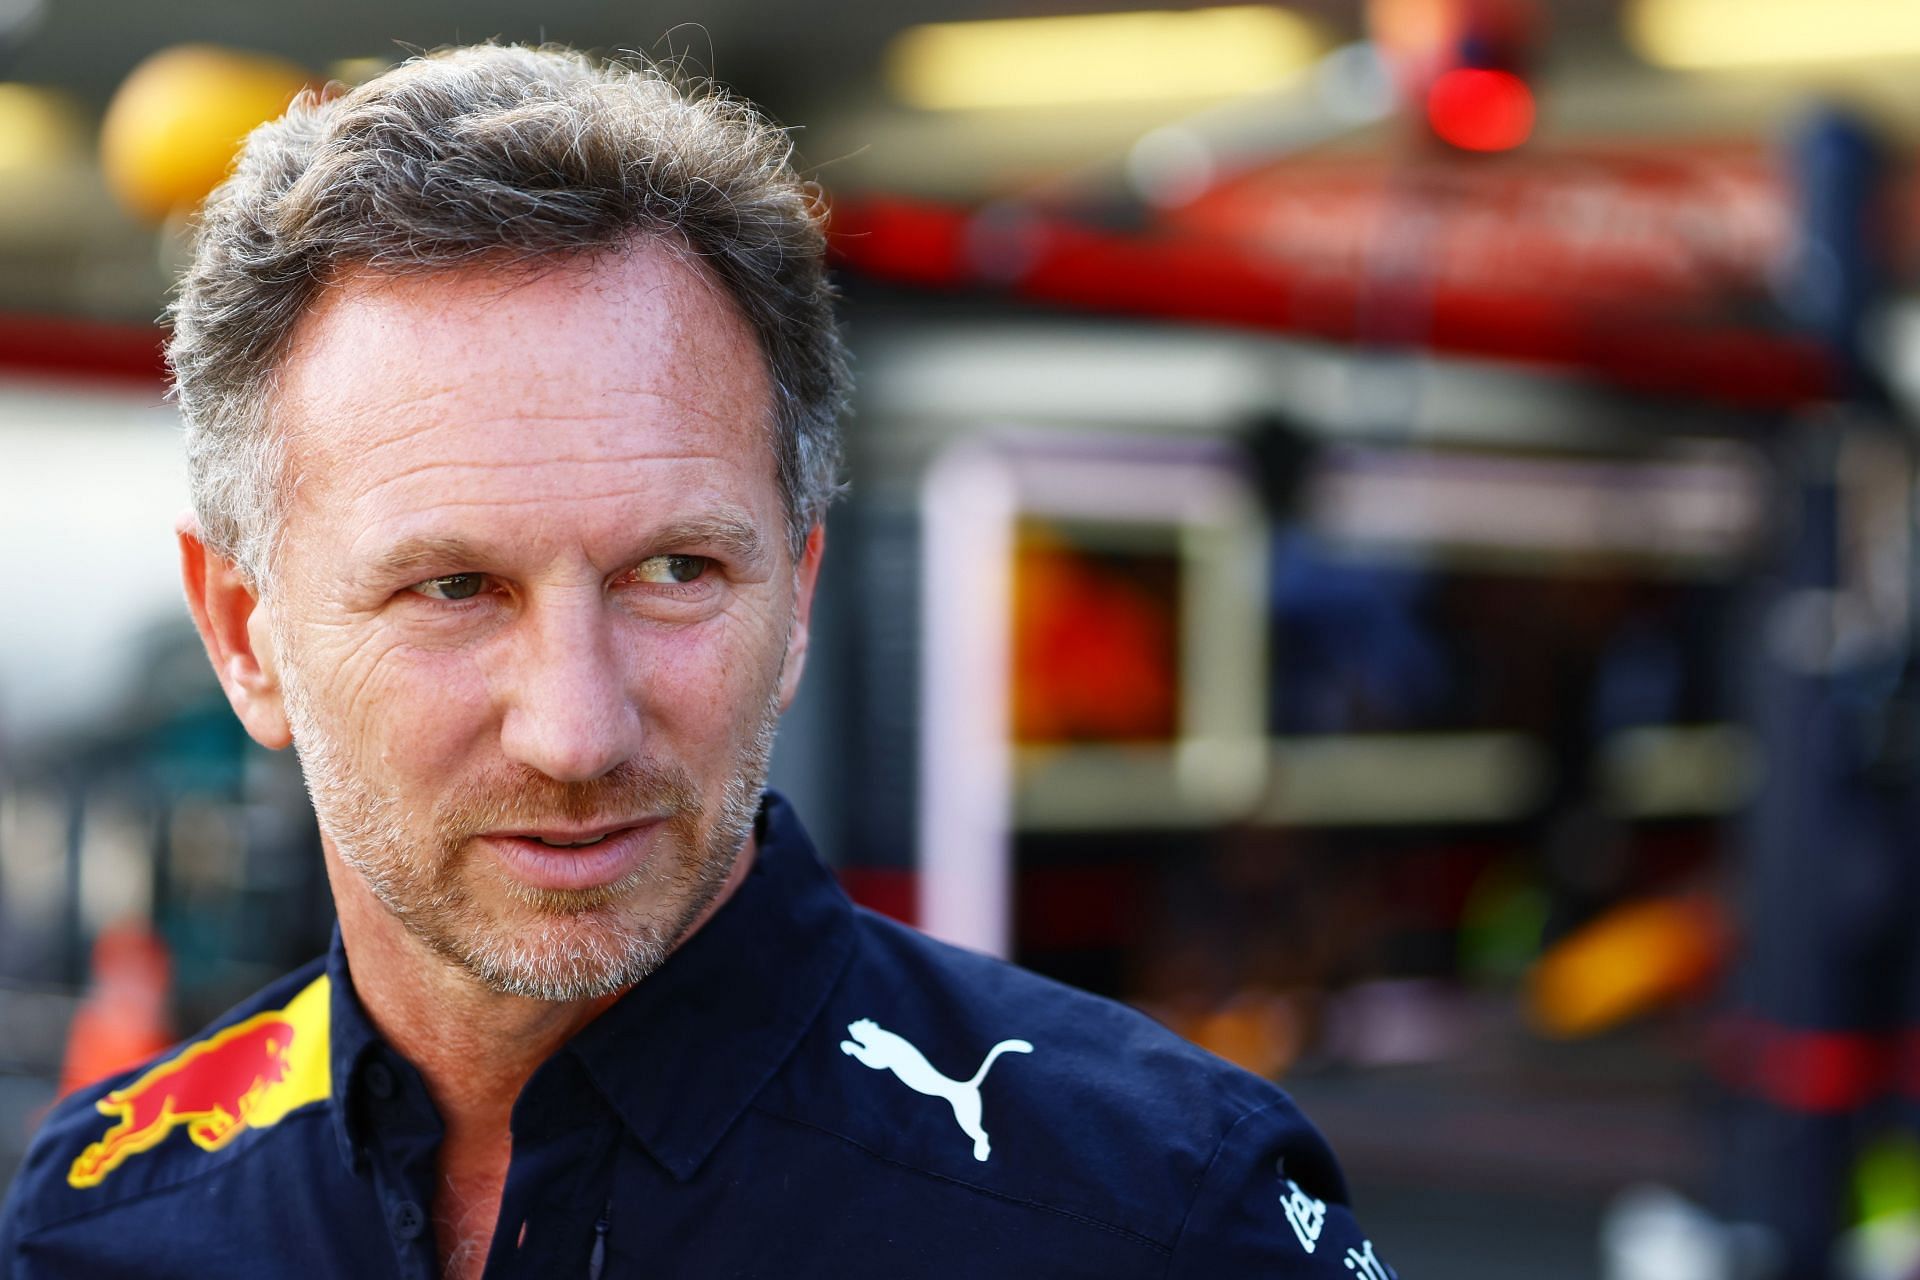 Red Bull team principal Christian Horner in the pit lane ahead of qualifying for the 2022 F1 Azerbaijan GP (Photo by Mark Thompson/Getty Images)